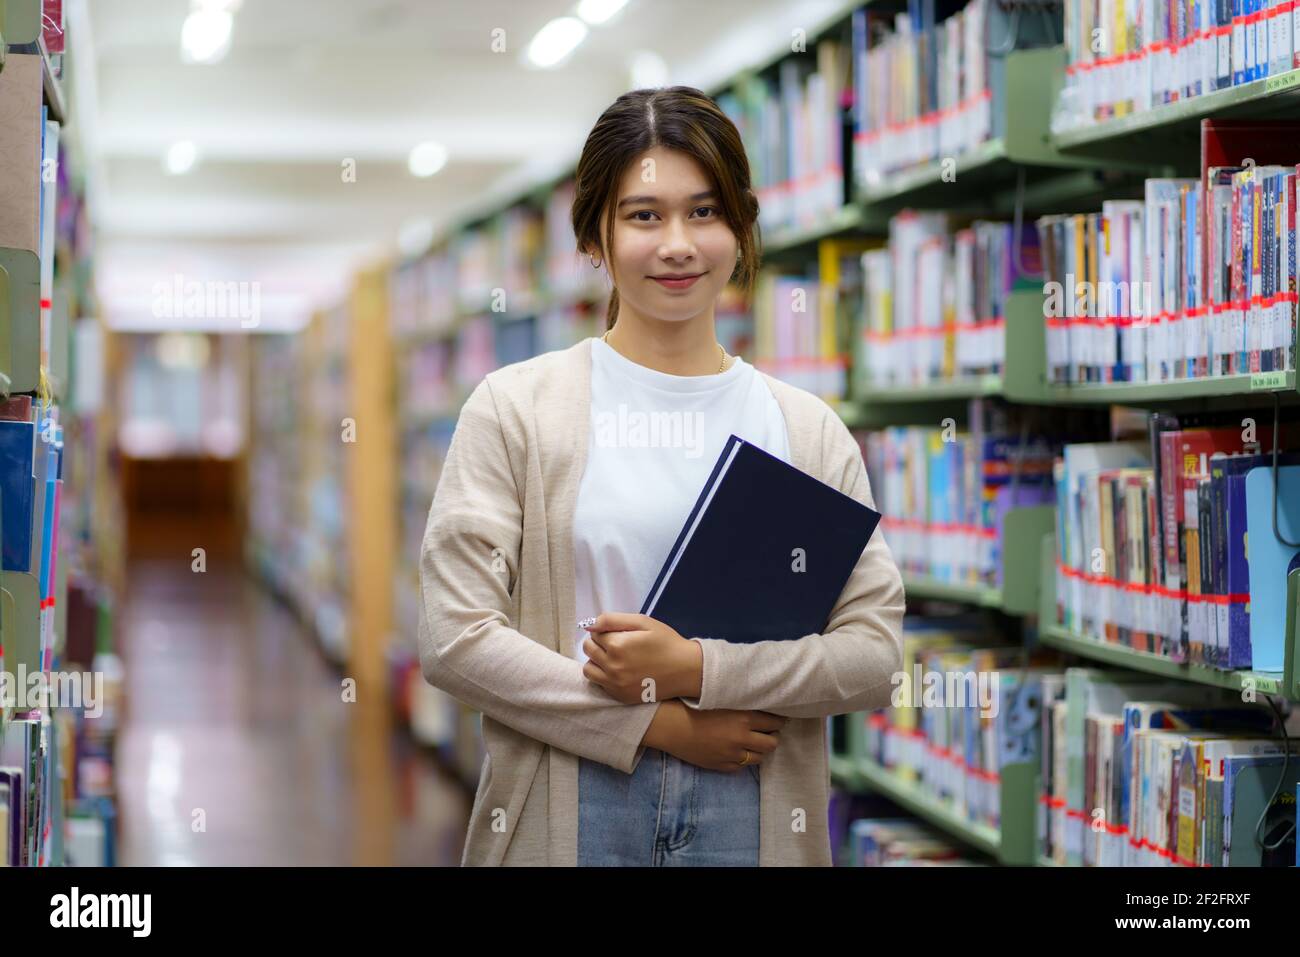 Portrait of Smart Asian woman university student reading book and looking at camera between bookshelves in campus library with copyspace. Stock Photo